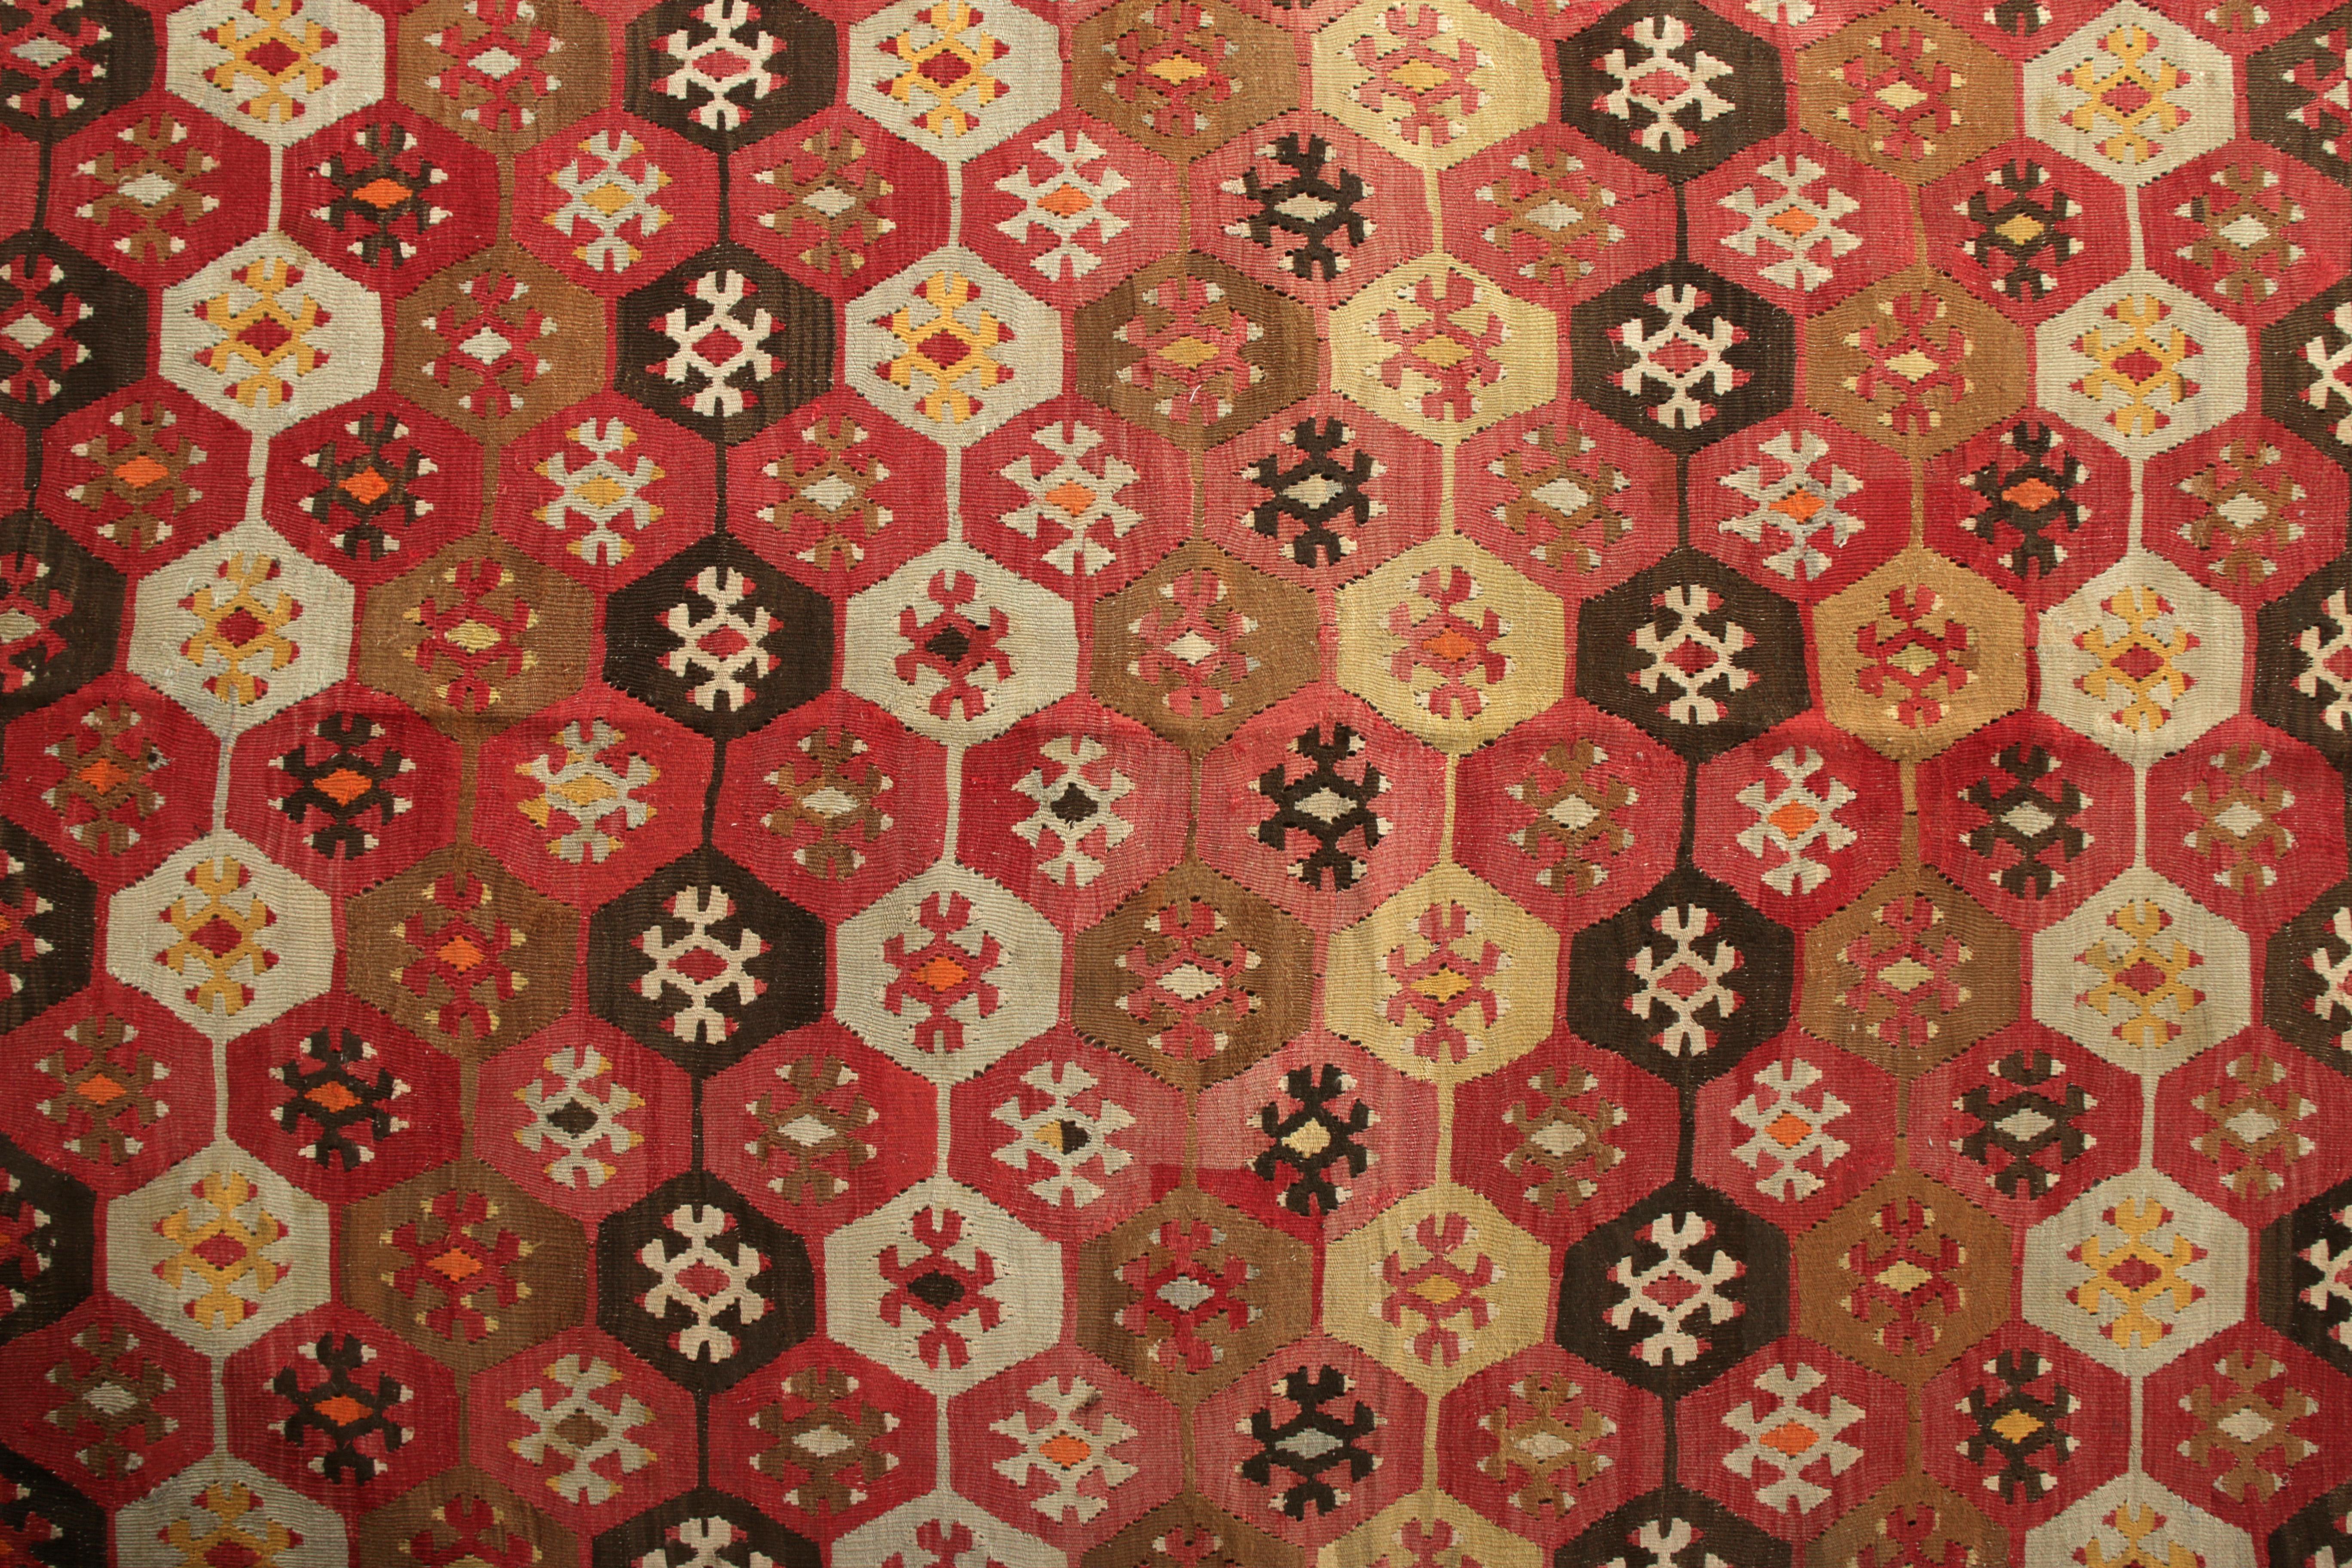 Hand-Woven 1950s Vintage Kilim Rug Geometric Red and Brown Midcentury Sarkisla Pattern For Sale